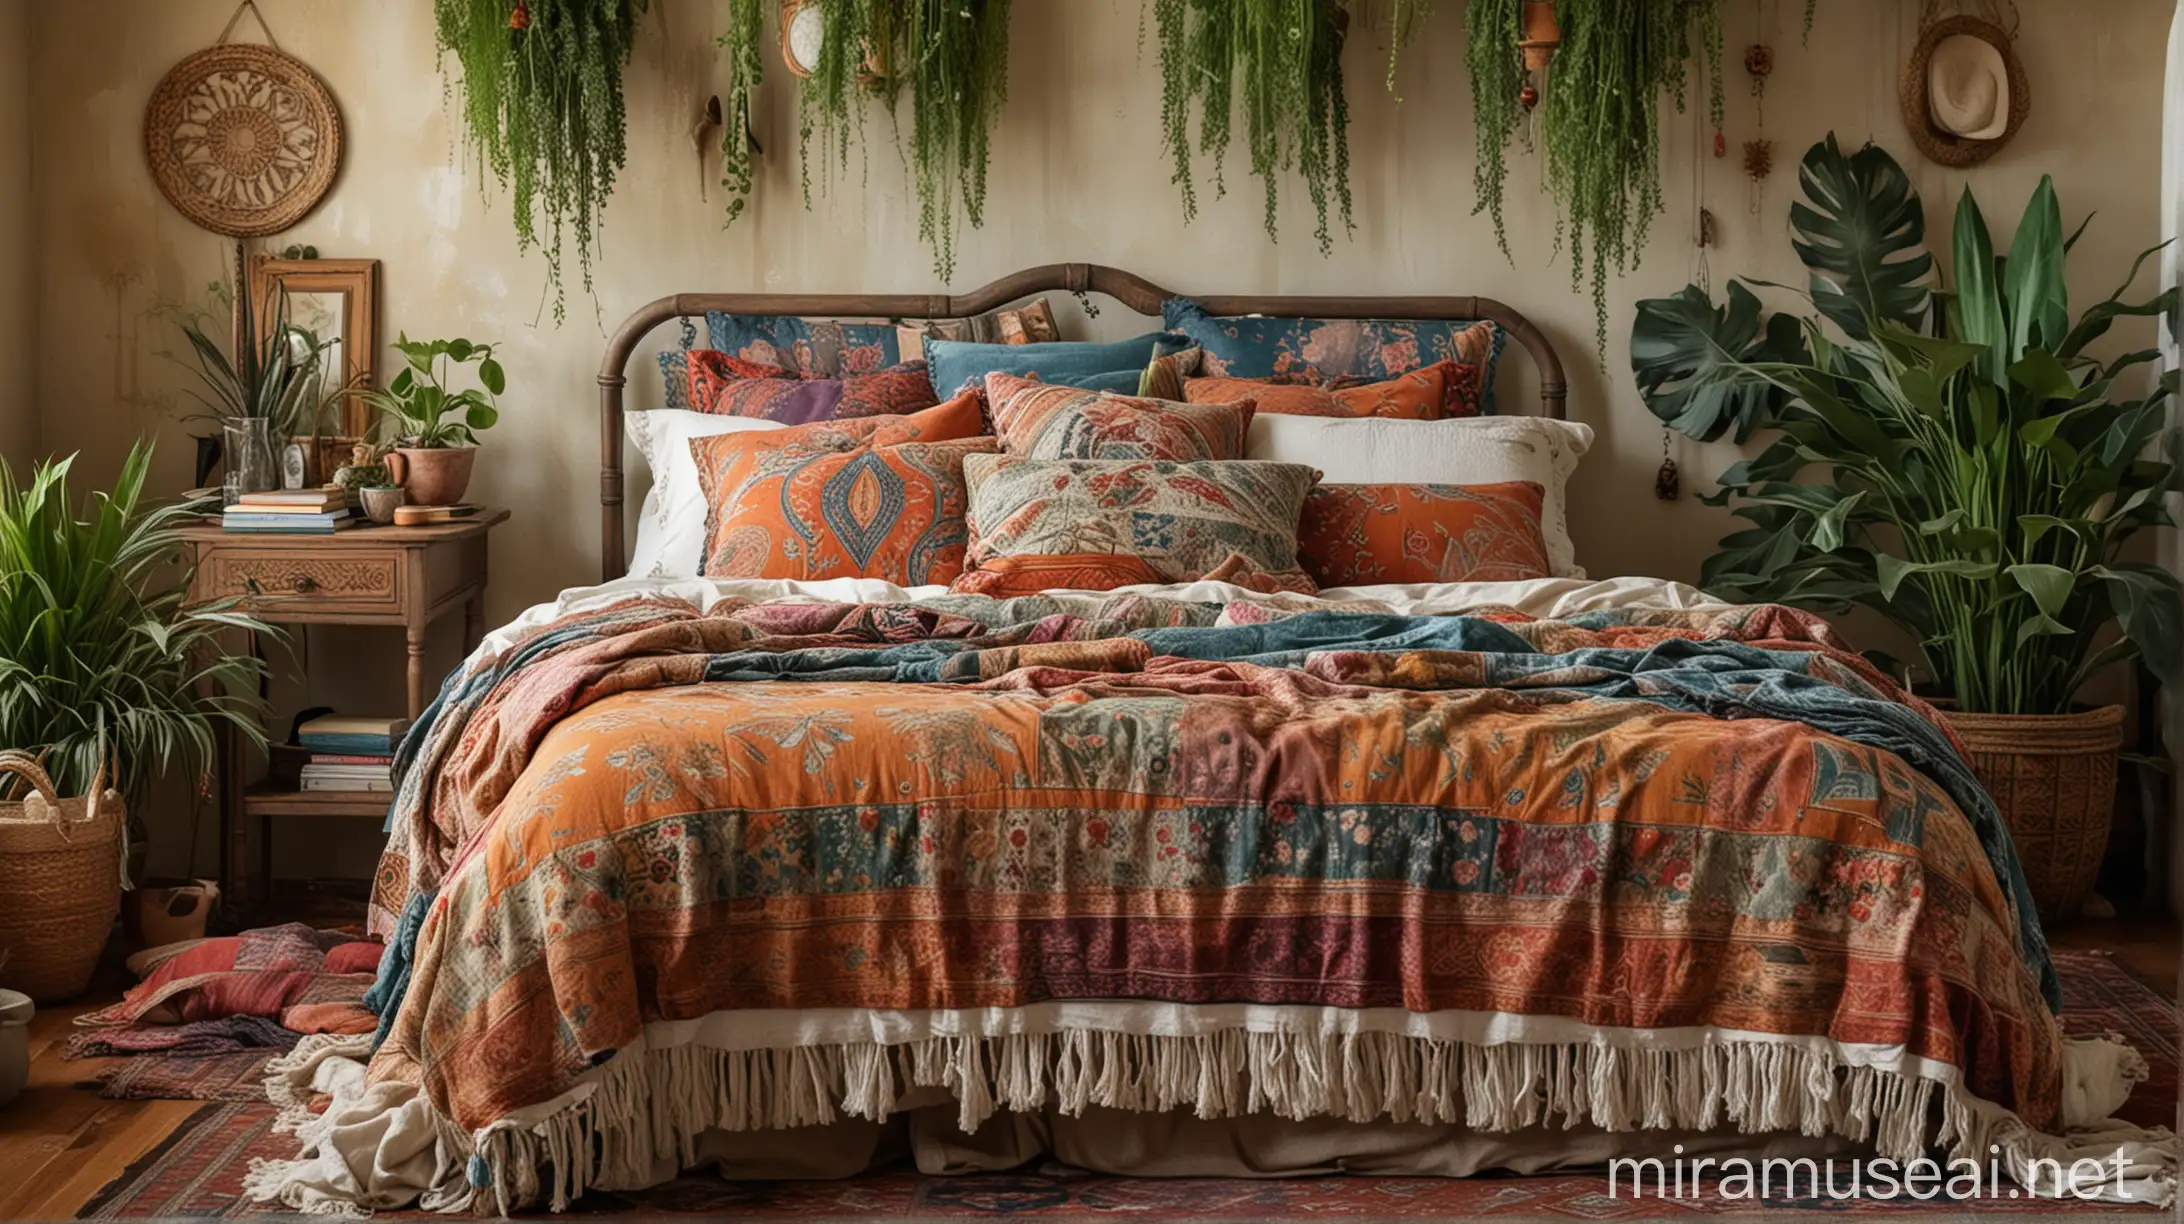 A photo with a whimsical and bohemian feel, emphasizing the layering of textures, patterns, and colors. The bed is a central element in the composition, surrounded by plants, throws, and other bohemian accents.